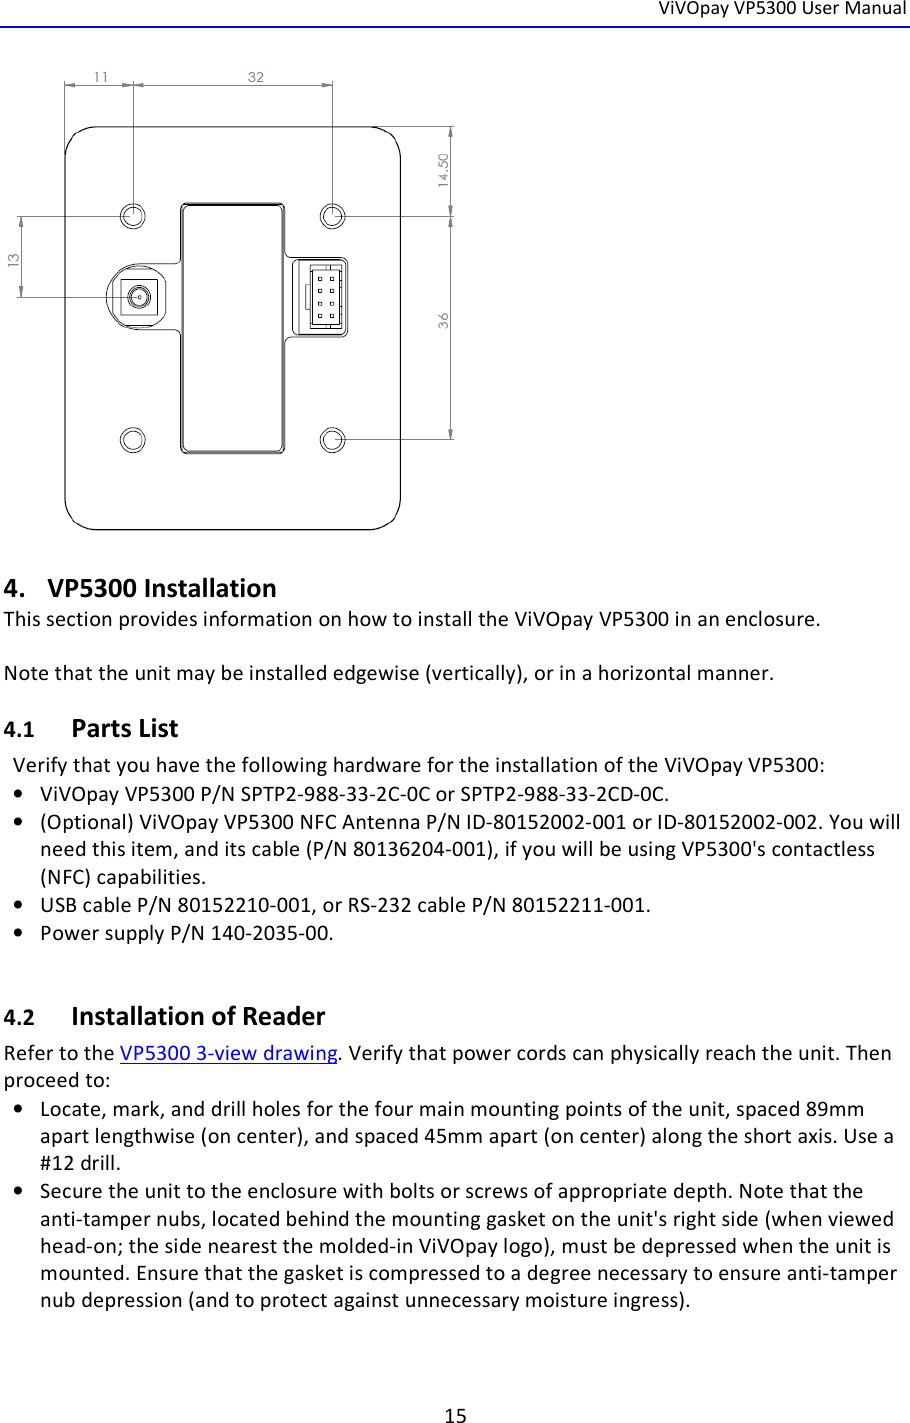  ViVOpay VP5300 User Manual   15    4. VP5300 Installation This section provides information on how to install the ViVOpay VP5300 in an enclosure.  Note that the unit may be installed edgewise (vertically), or in a horizontal manner. 4.1 Parts List Verify that you have the following hardware for the installation of the ViVOpay VP5300: • ViVOpay VP5300 P/N SPTP2-988-33-2C-0C or SPTP2-988-33-2CD-0C. • (Optional) ViVOpay VP5300 NFC Antenna P/N ID-80152002-001 or ID-80152002-002. You will need this item, and its cable (P/N 80136204-001), if you will be using VP5300&apos;s contactless (NFC) capabilities. • USB cable P/N 80152210-001, or RS-232 cable P/N 80152211-001. • Power supply P/N 140-2035-00.  4.2 Installation of Reader Refer to the VP5300 3-view drawing. Verify that power cords can physically reach the unit. Then proceed to: • Locate, mark, and drill holes for the four main mounting points of the unit, spaced 89mm apart lengthwise (on center), and spaced 45mm apart (on center) along the short axis. Use a #12 drill.  • Secure the unit to the enclosure with bolts or screws of appropriate depth. Note that the anti-tamper nubs, located behind the mounting gasket on the unit&apos;s right side (when viewed head-on; the side nearest the molded-in ViVOpay logo), must be depressed when the unit is mounted. Ensure that the gasket is compressed to a degree necessary to ensure anti-tamper nub depression (and to protect against unnecessary moisture ingress).   